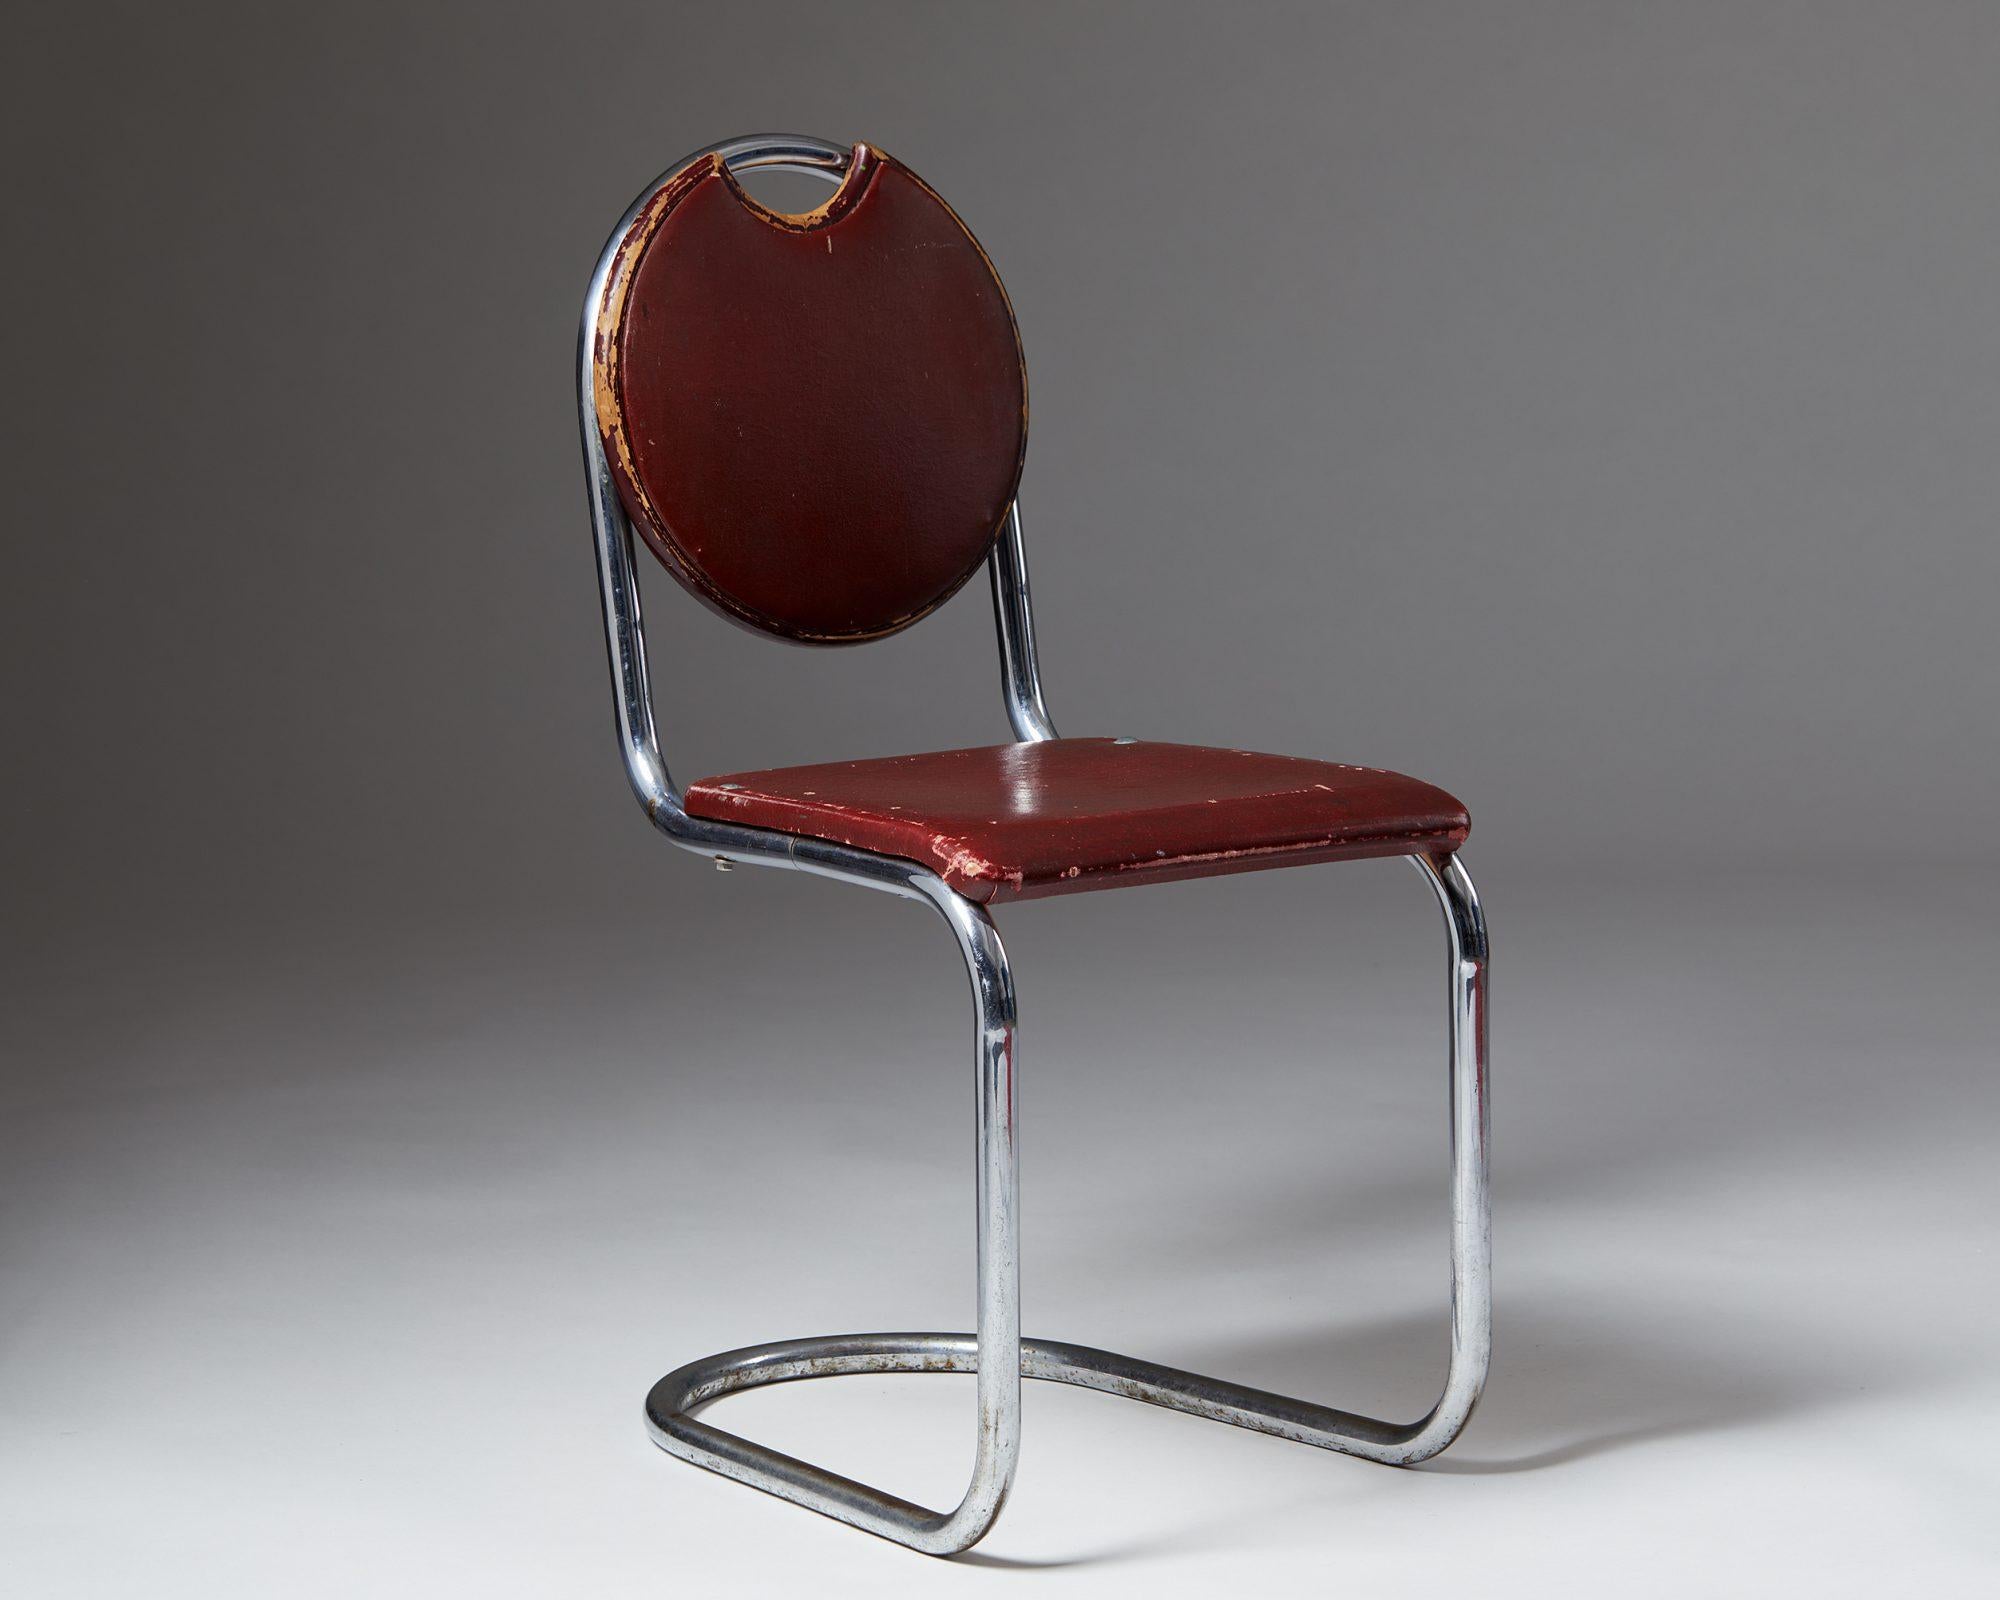 Steel and leather upholstery.

Measures: H: 82.5 cm/ 2' 8 1/2